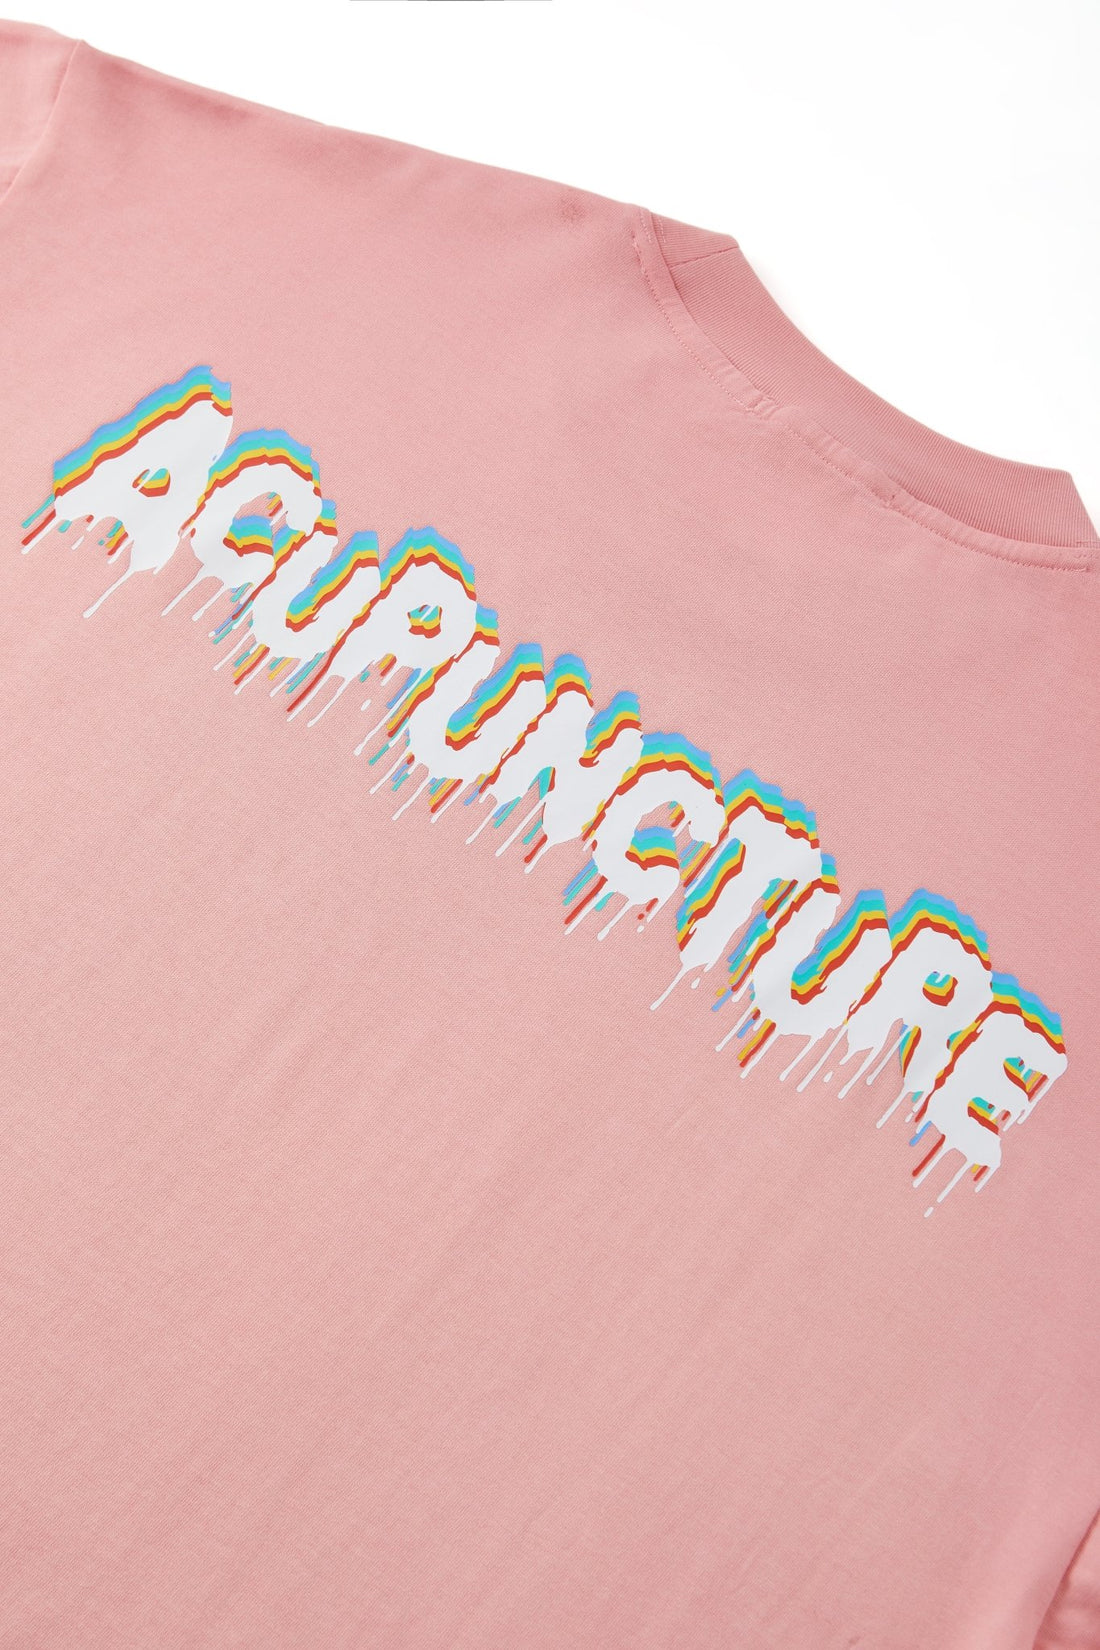 INVERTED EMBLEM TSHIRT BABY PINK Acupuncture